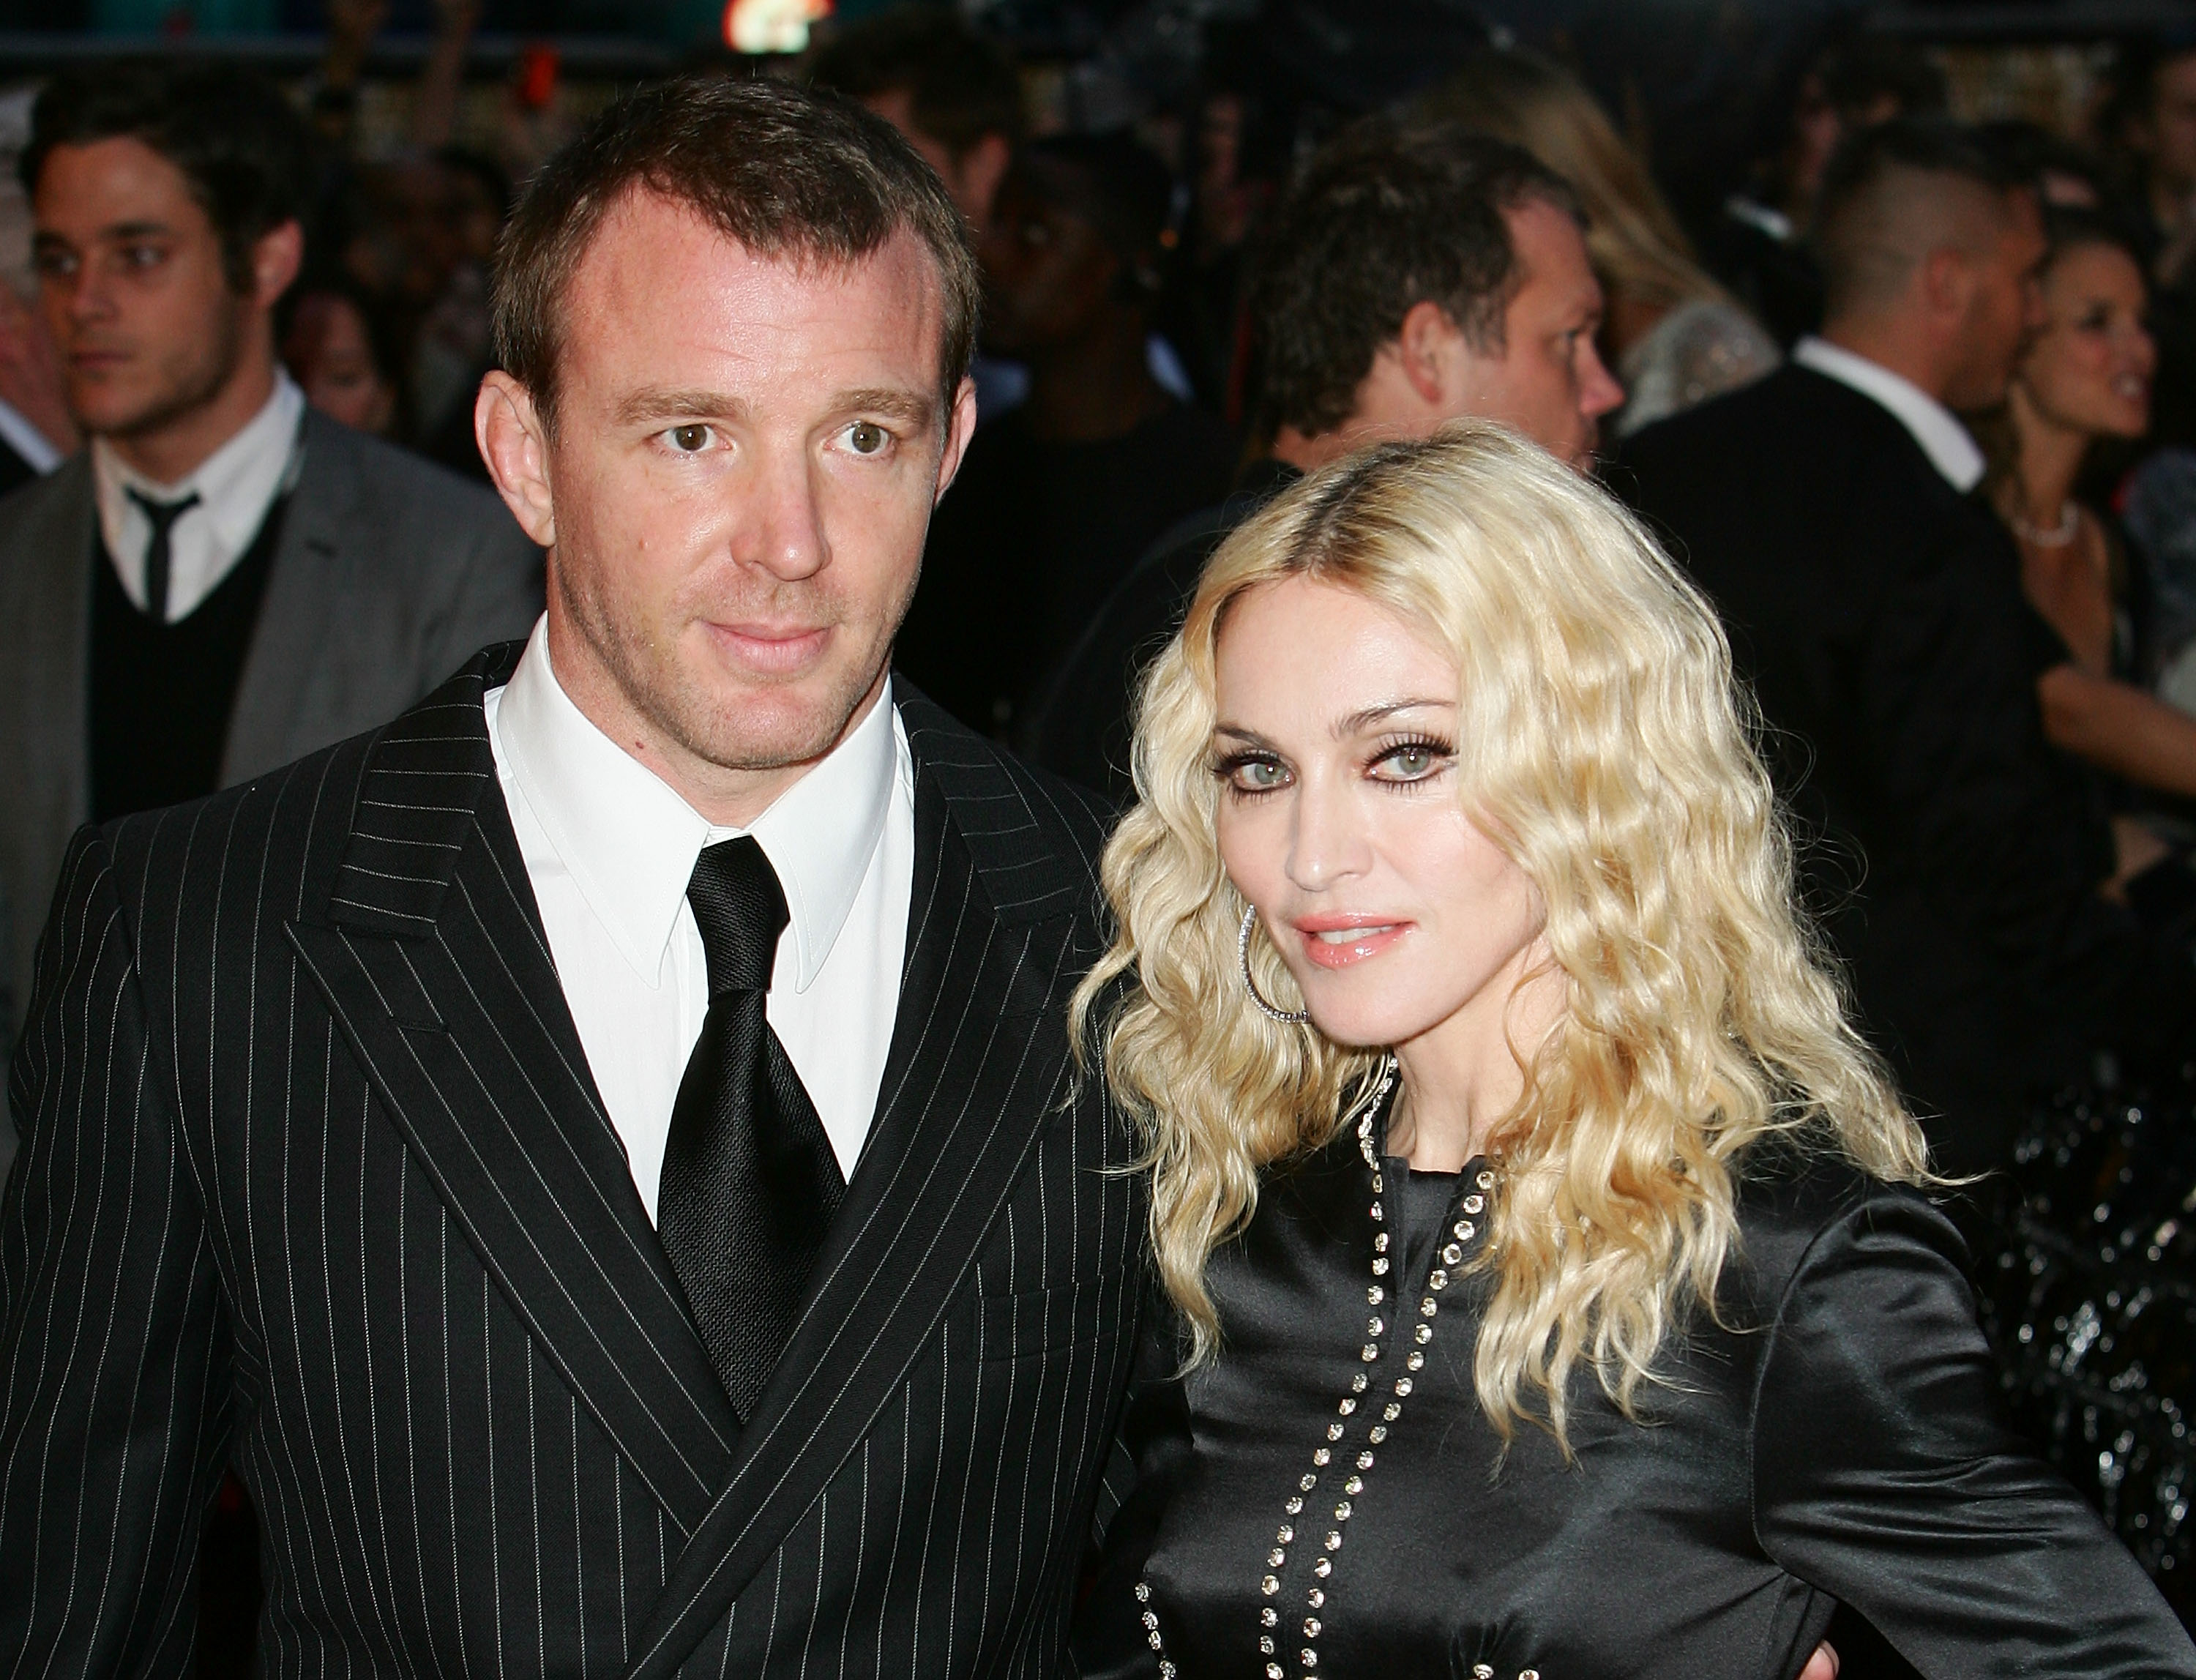 Madonna and Guy Ritchie attend the world premiere of RocknRolla